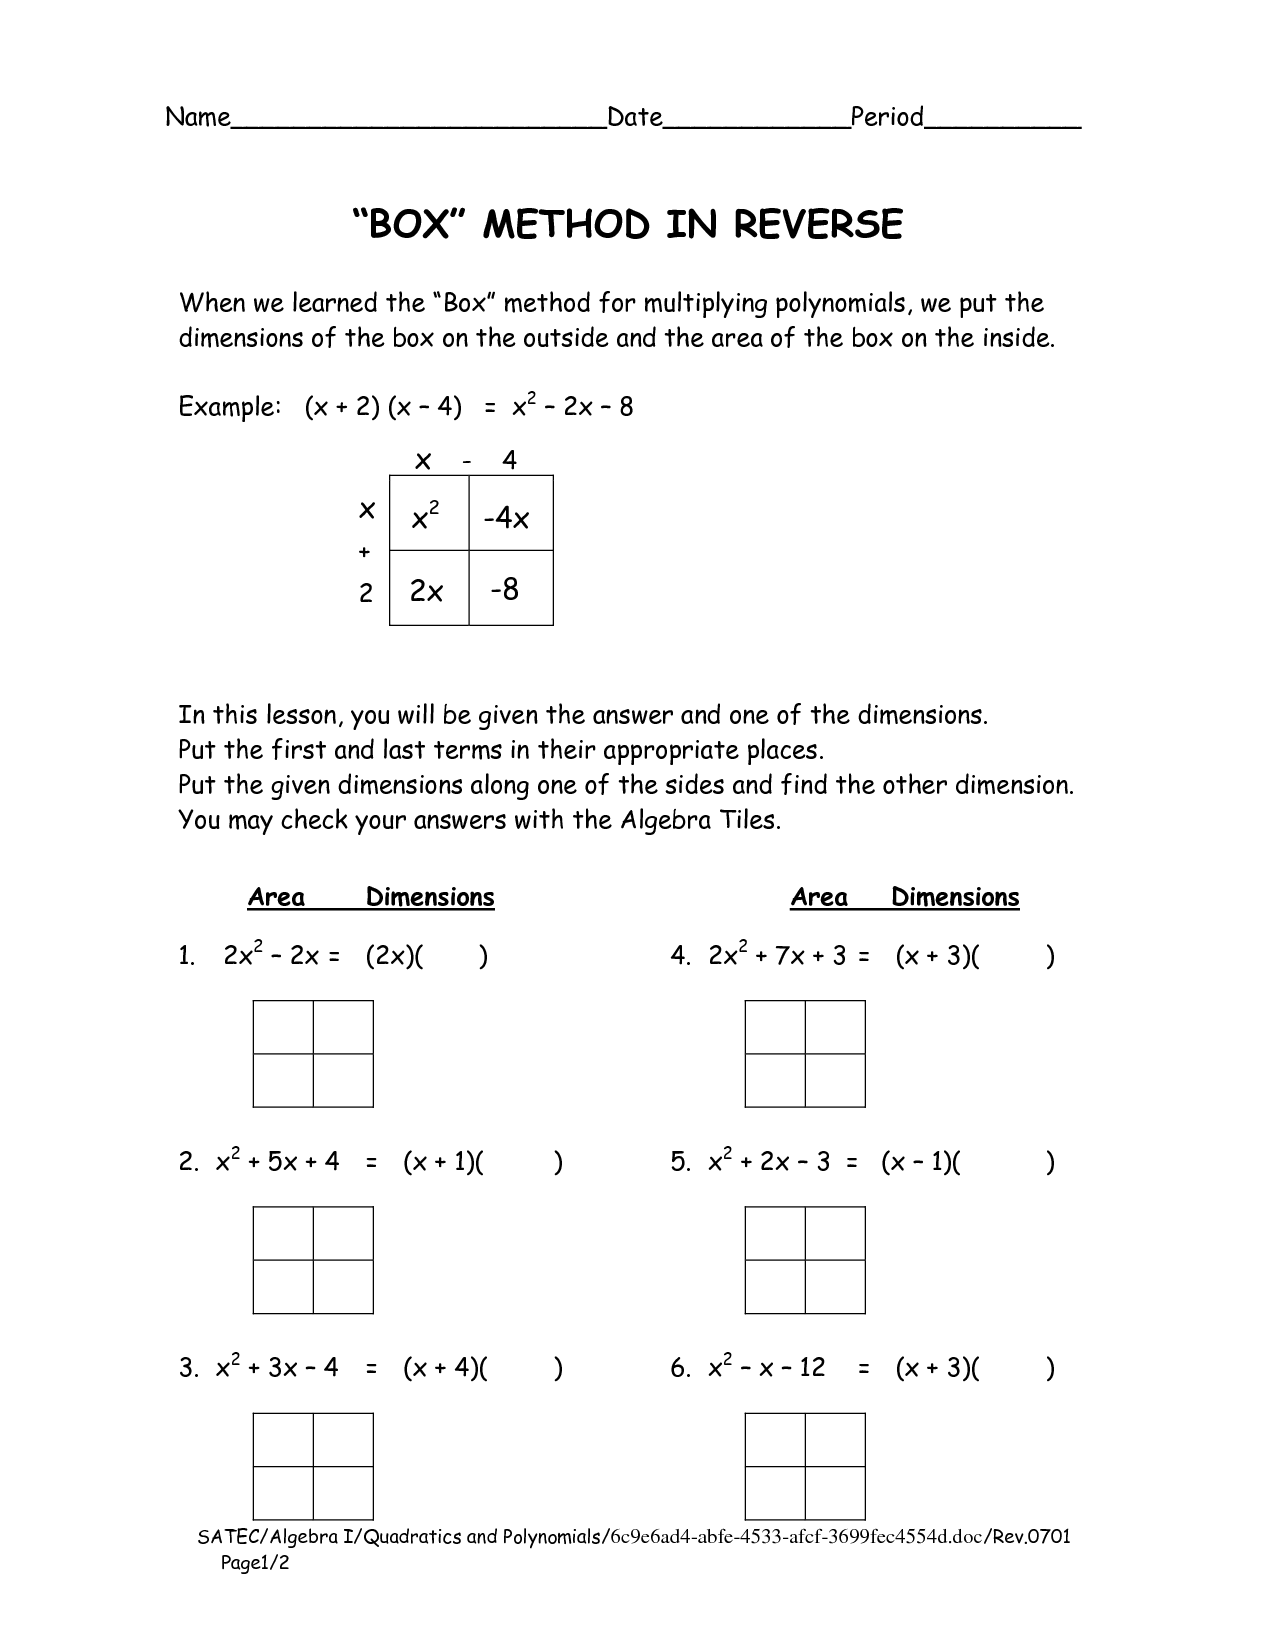 15-best-images-of-multiply-polynomials-box-method-worksheet